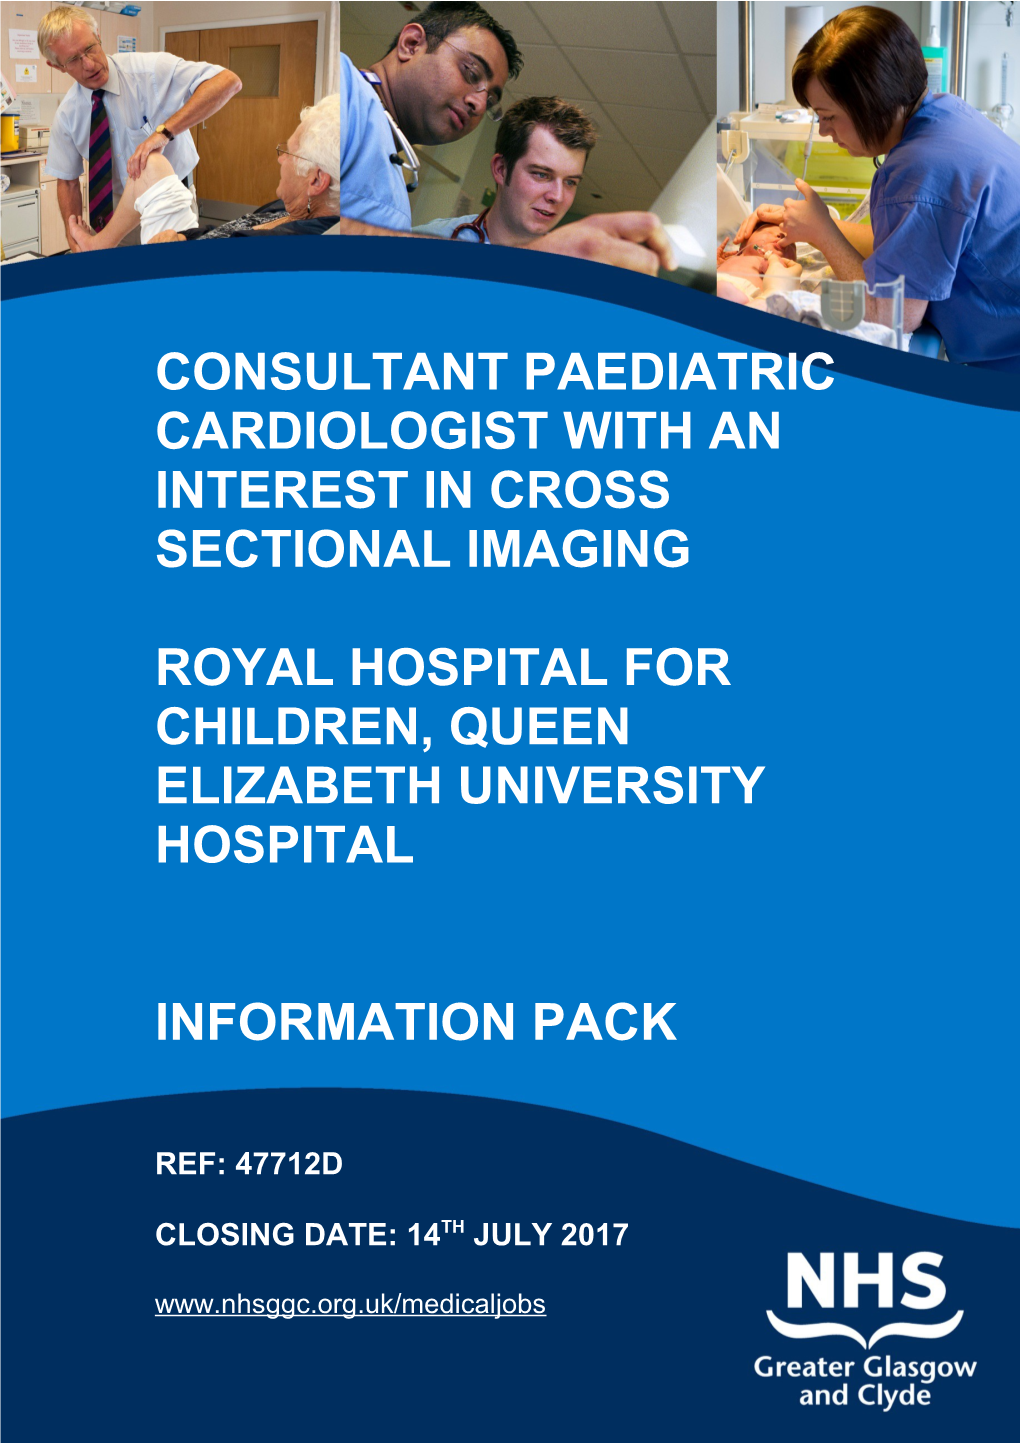 Consultant Paediatric Cardiologist with an Interest in Cross Sectional Imaging